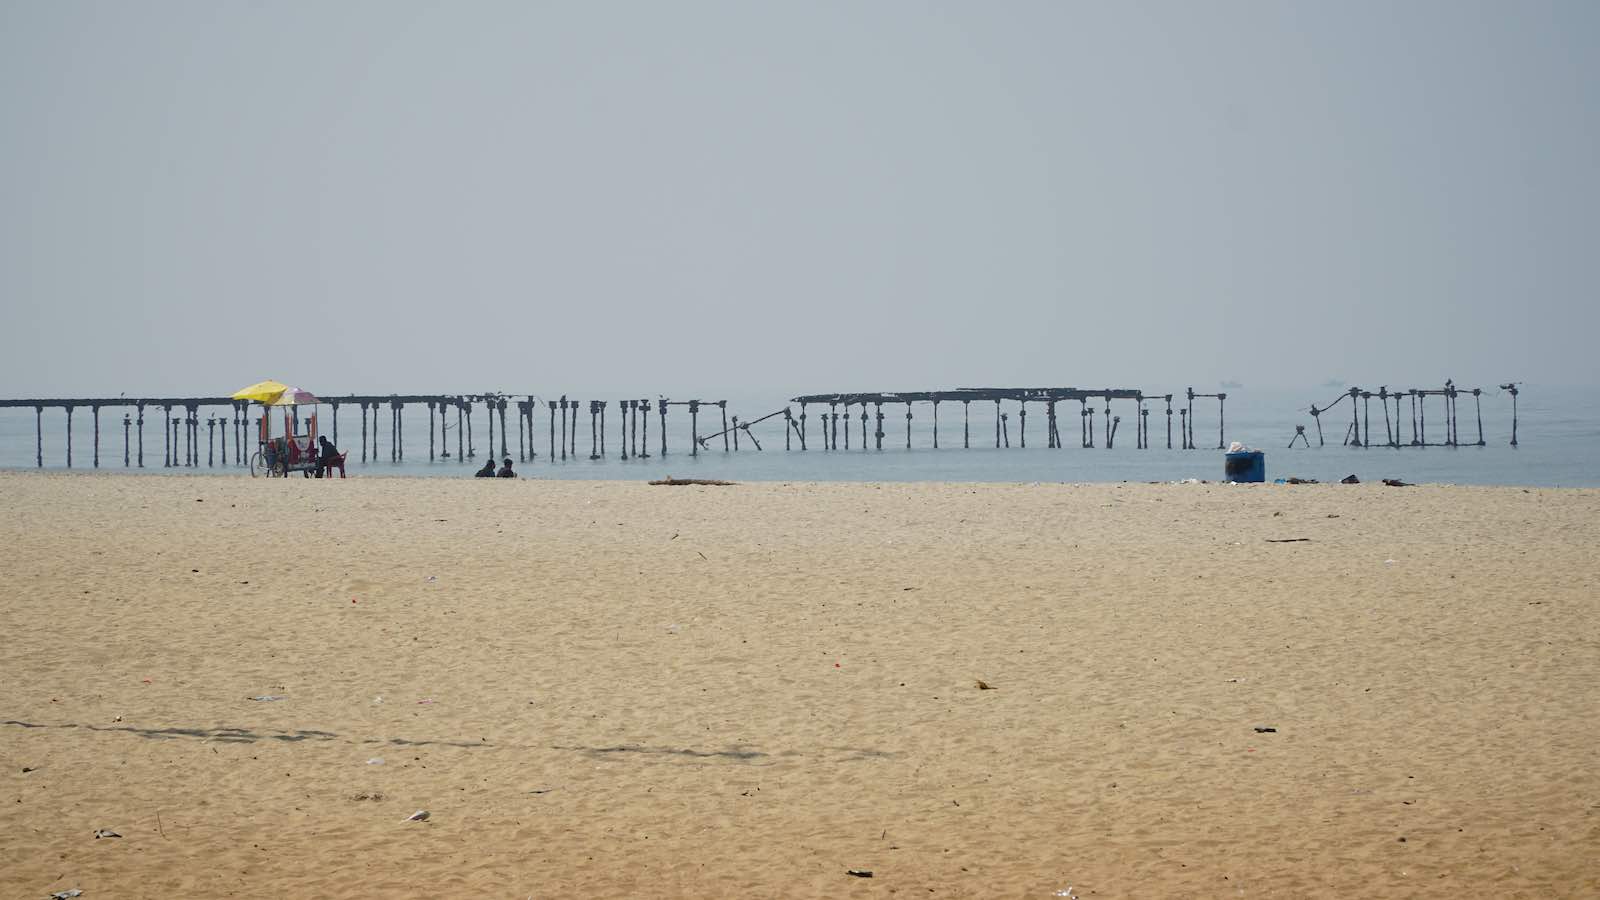 Got to Allapuzha Beach, and it reminded a lot of Huntington Beach back home. It was big and wide and pretty empty. There was a lot more trash and debris in the sand though compared to back home. Also spotted a long abandoned pier jutting out into the ocean like a rusty spine.